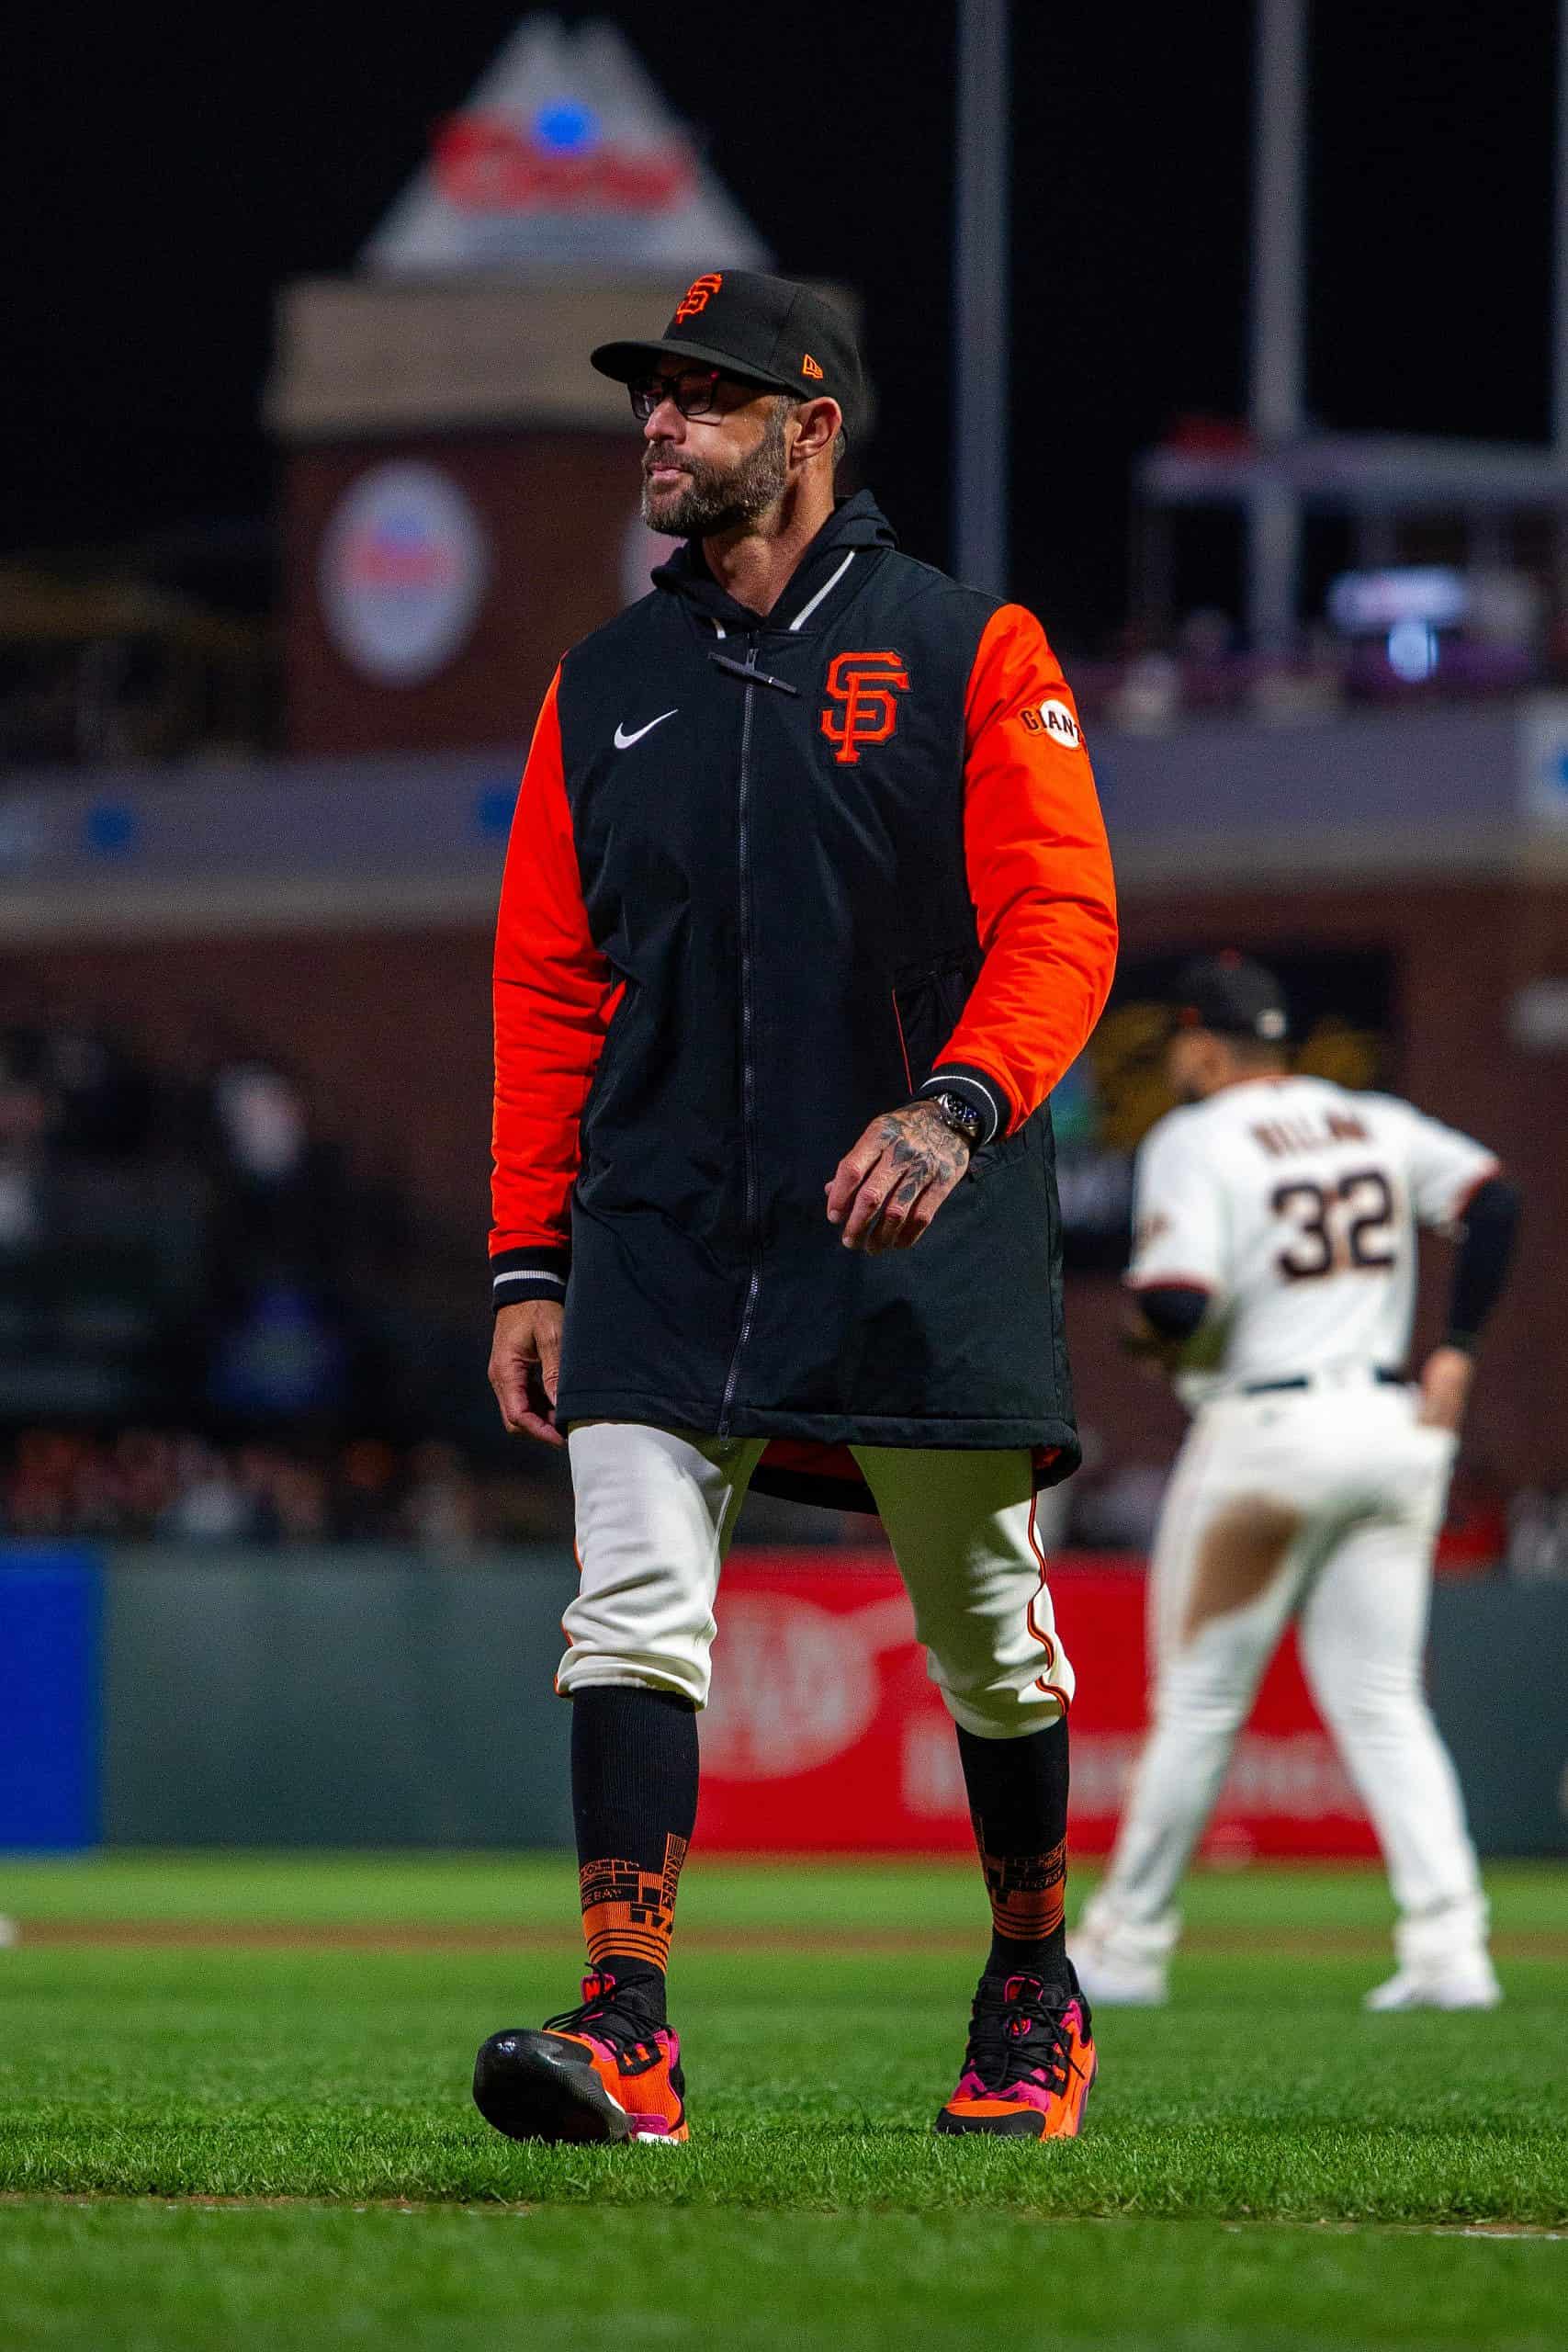 Lessons learned from the 2023 San Francisco Giants photo day